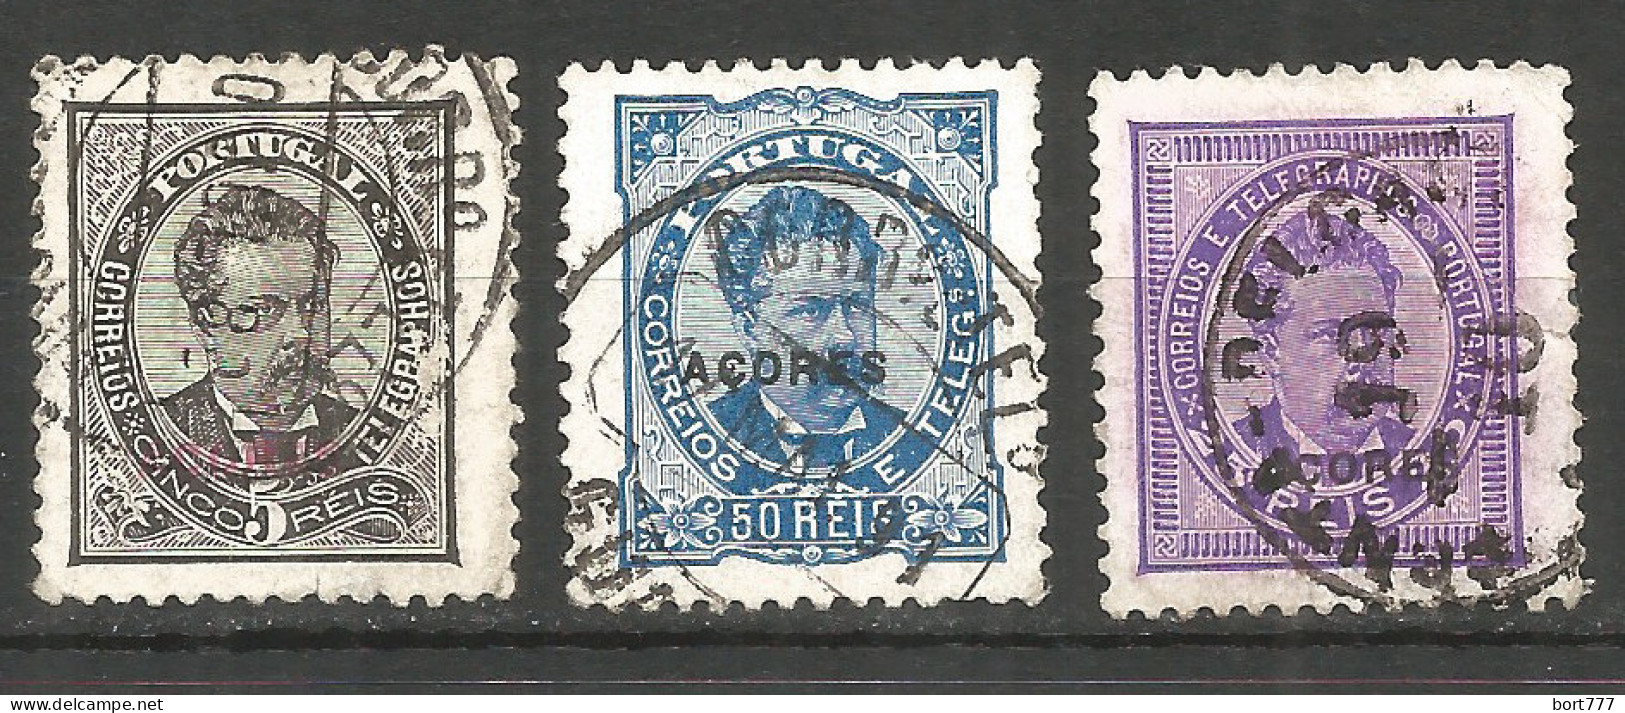 Portugal Azores 1882 Used Stamps Set  - Usati